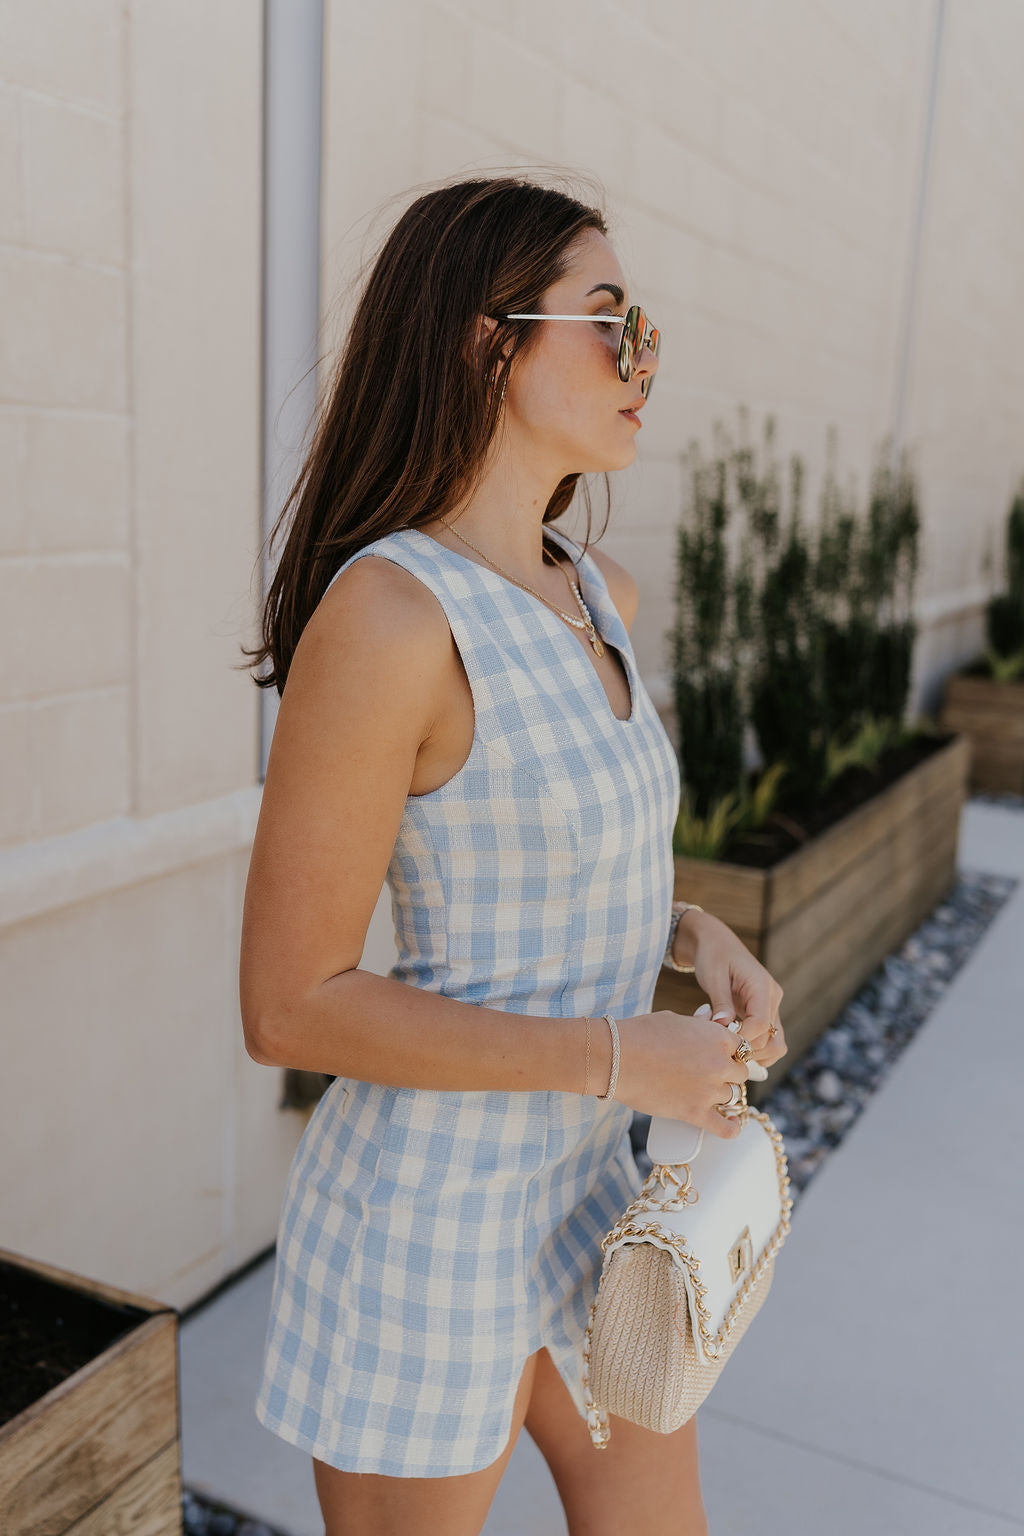 Upper body side view of female model wearing the Georgina Blue Gingham Mini Dress that has light blue and white gingham fabric, a noticed neckline, a side slit, and is sleeveless. Model is holding purse in front of her